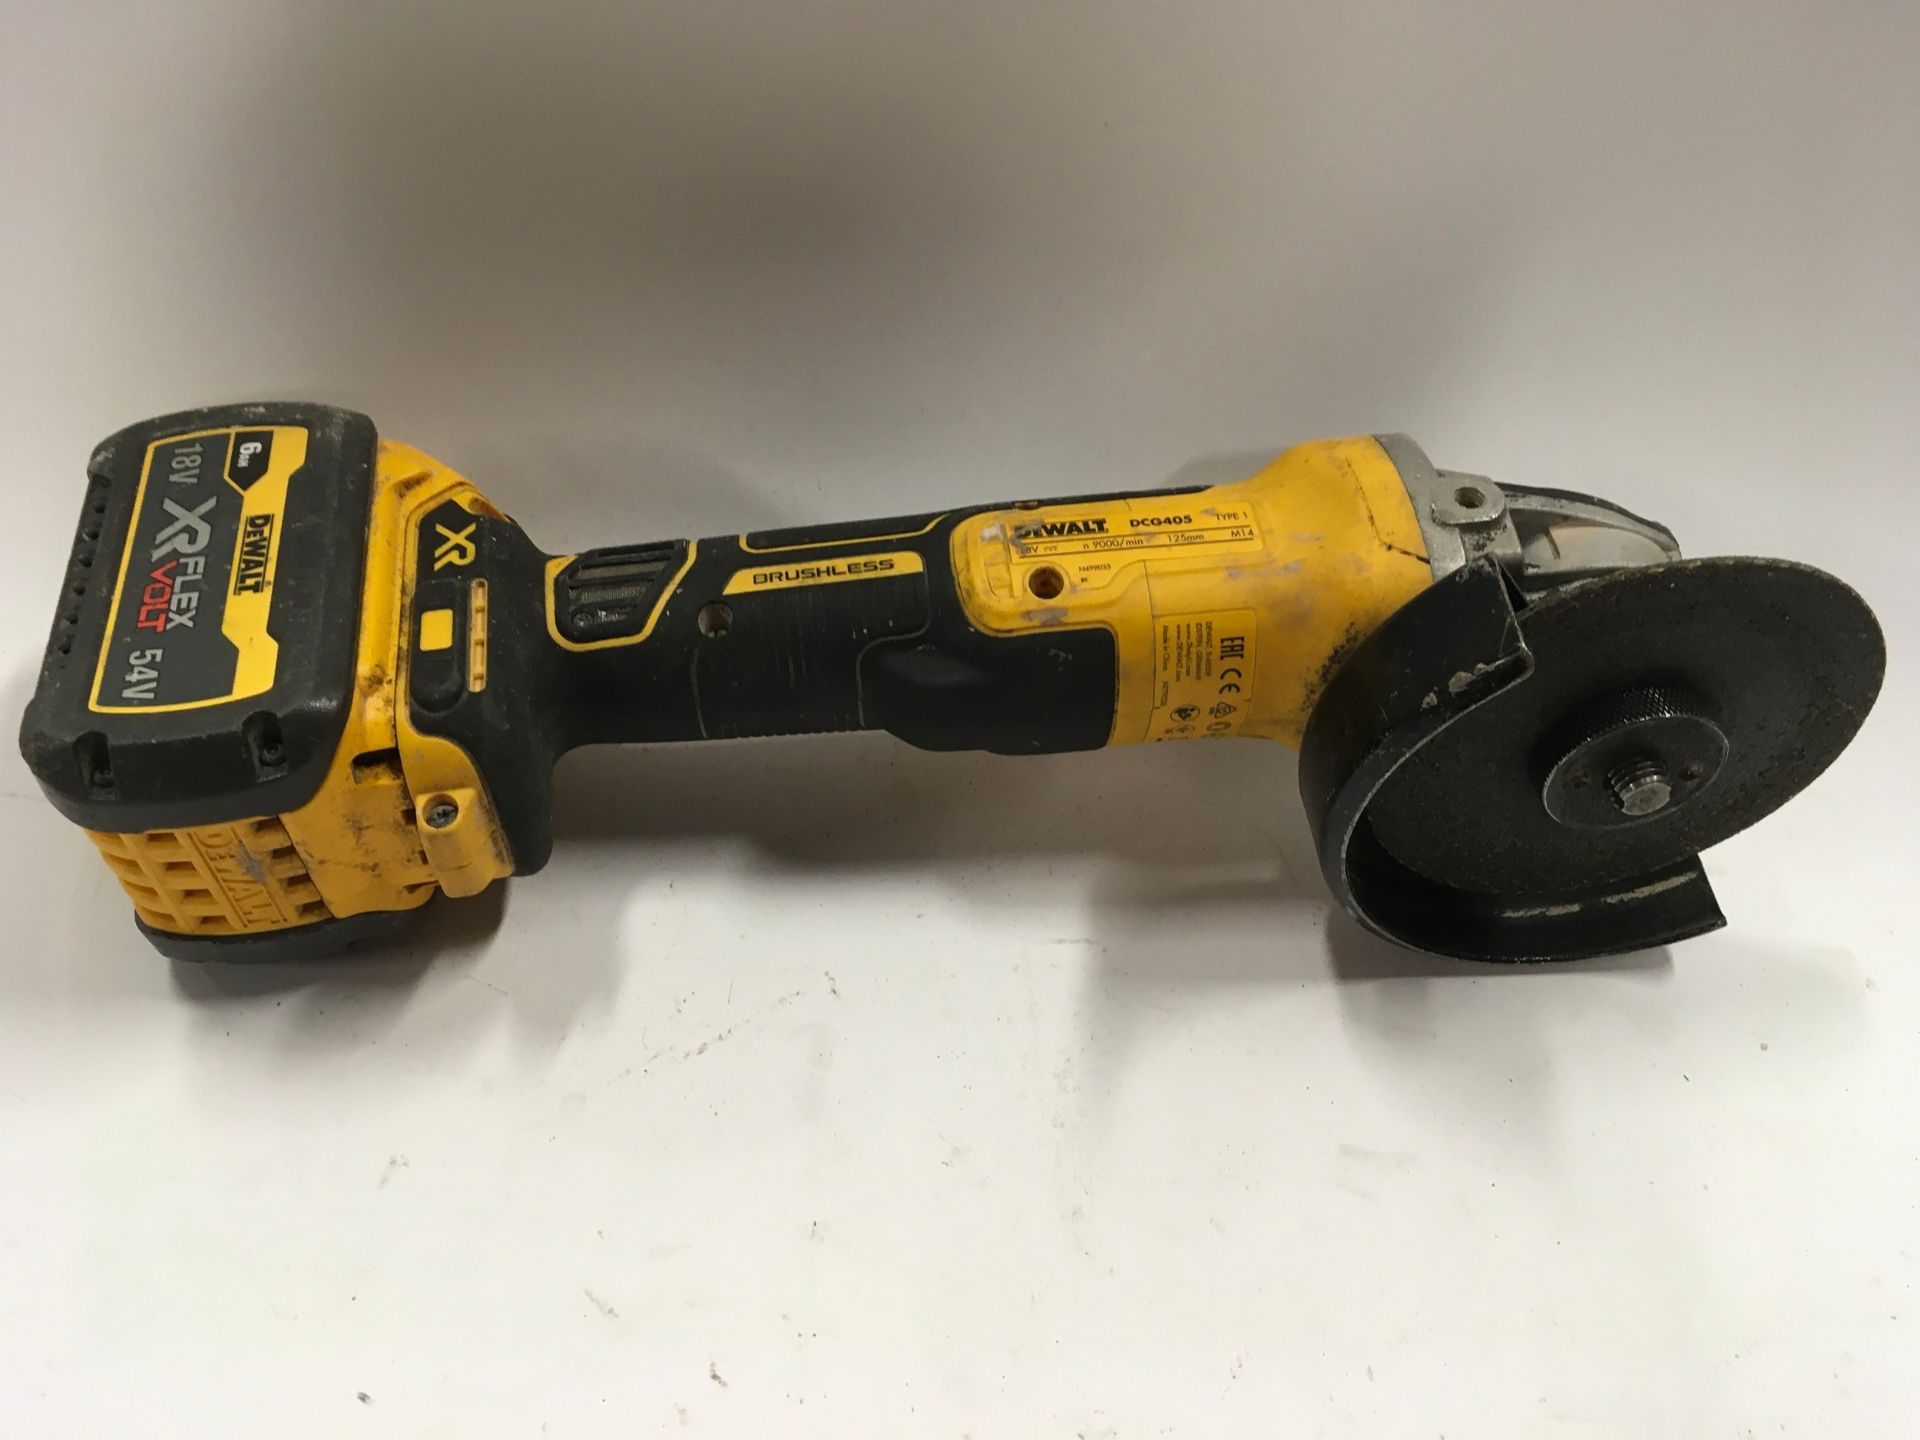 Dewalt brushless Type 1 angle grinder with battery, no charger (34)